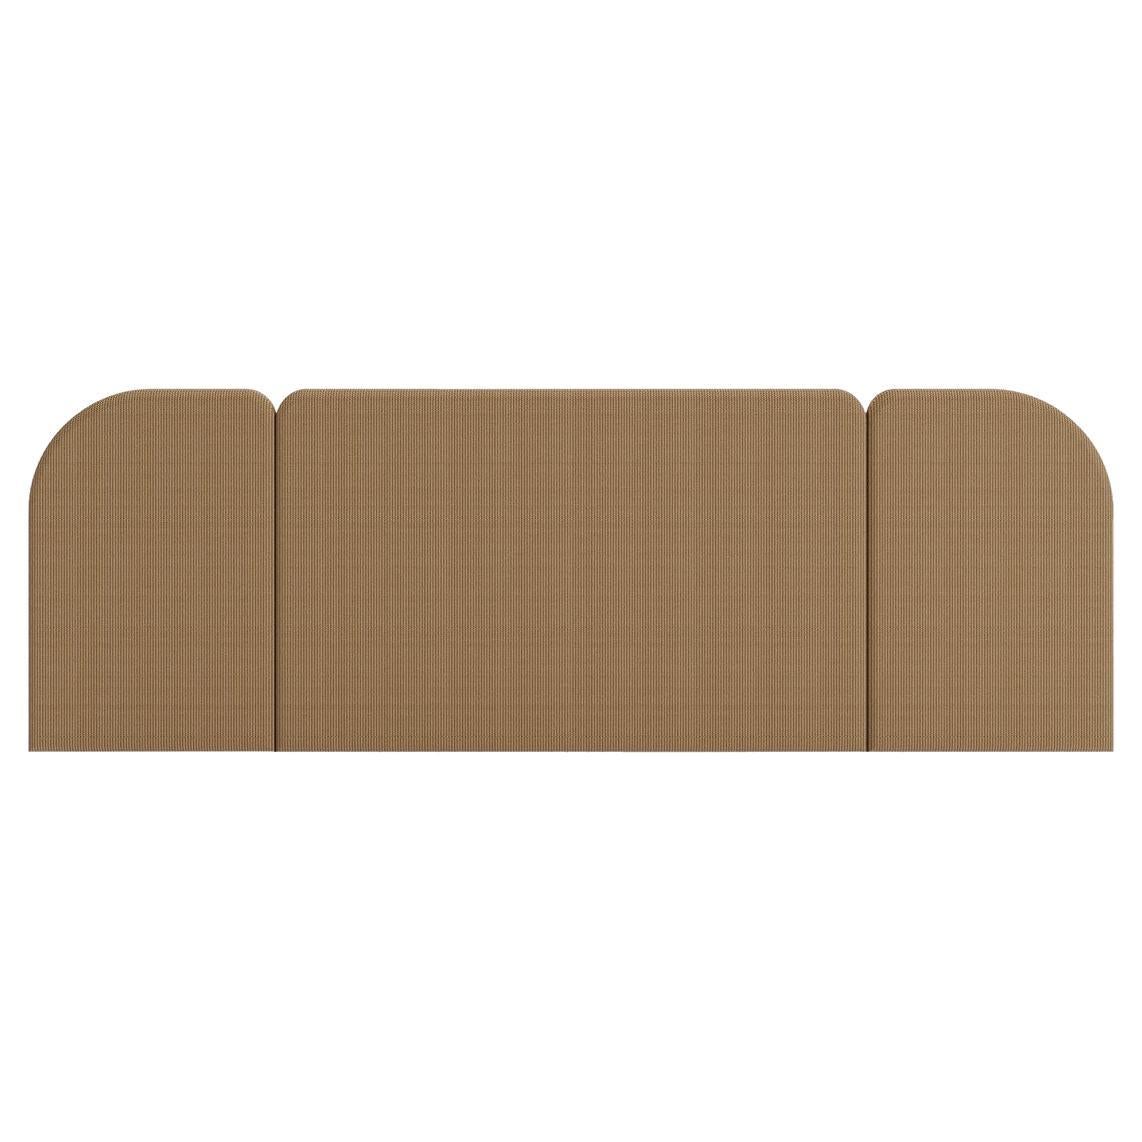  ENYO Headboard in Cappuccino Velvet, 3 Modules For Sale